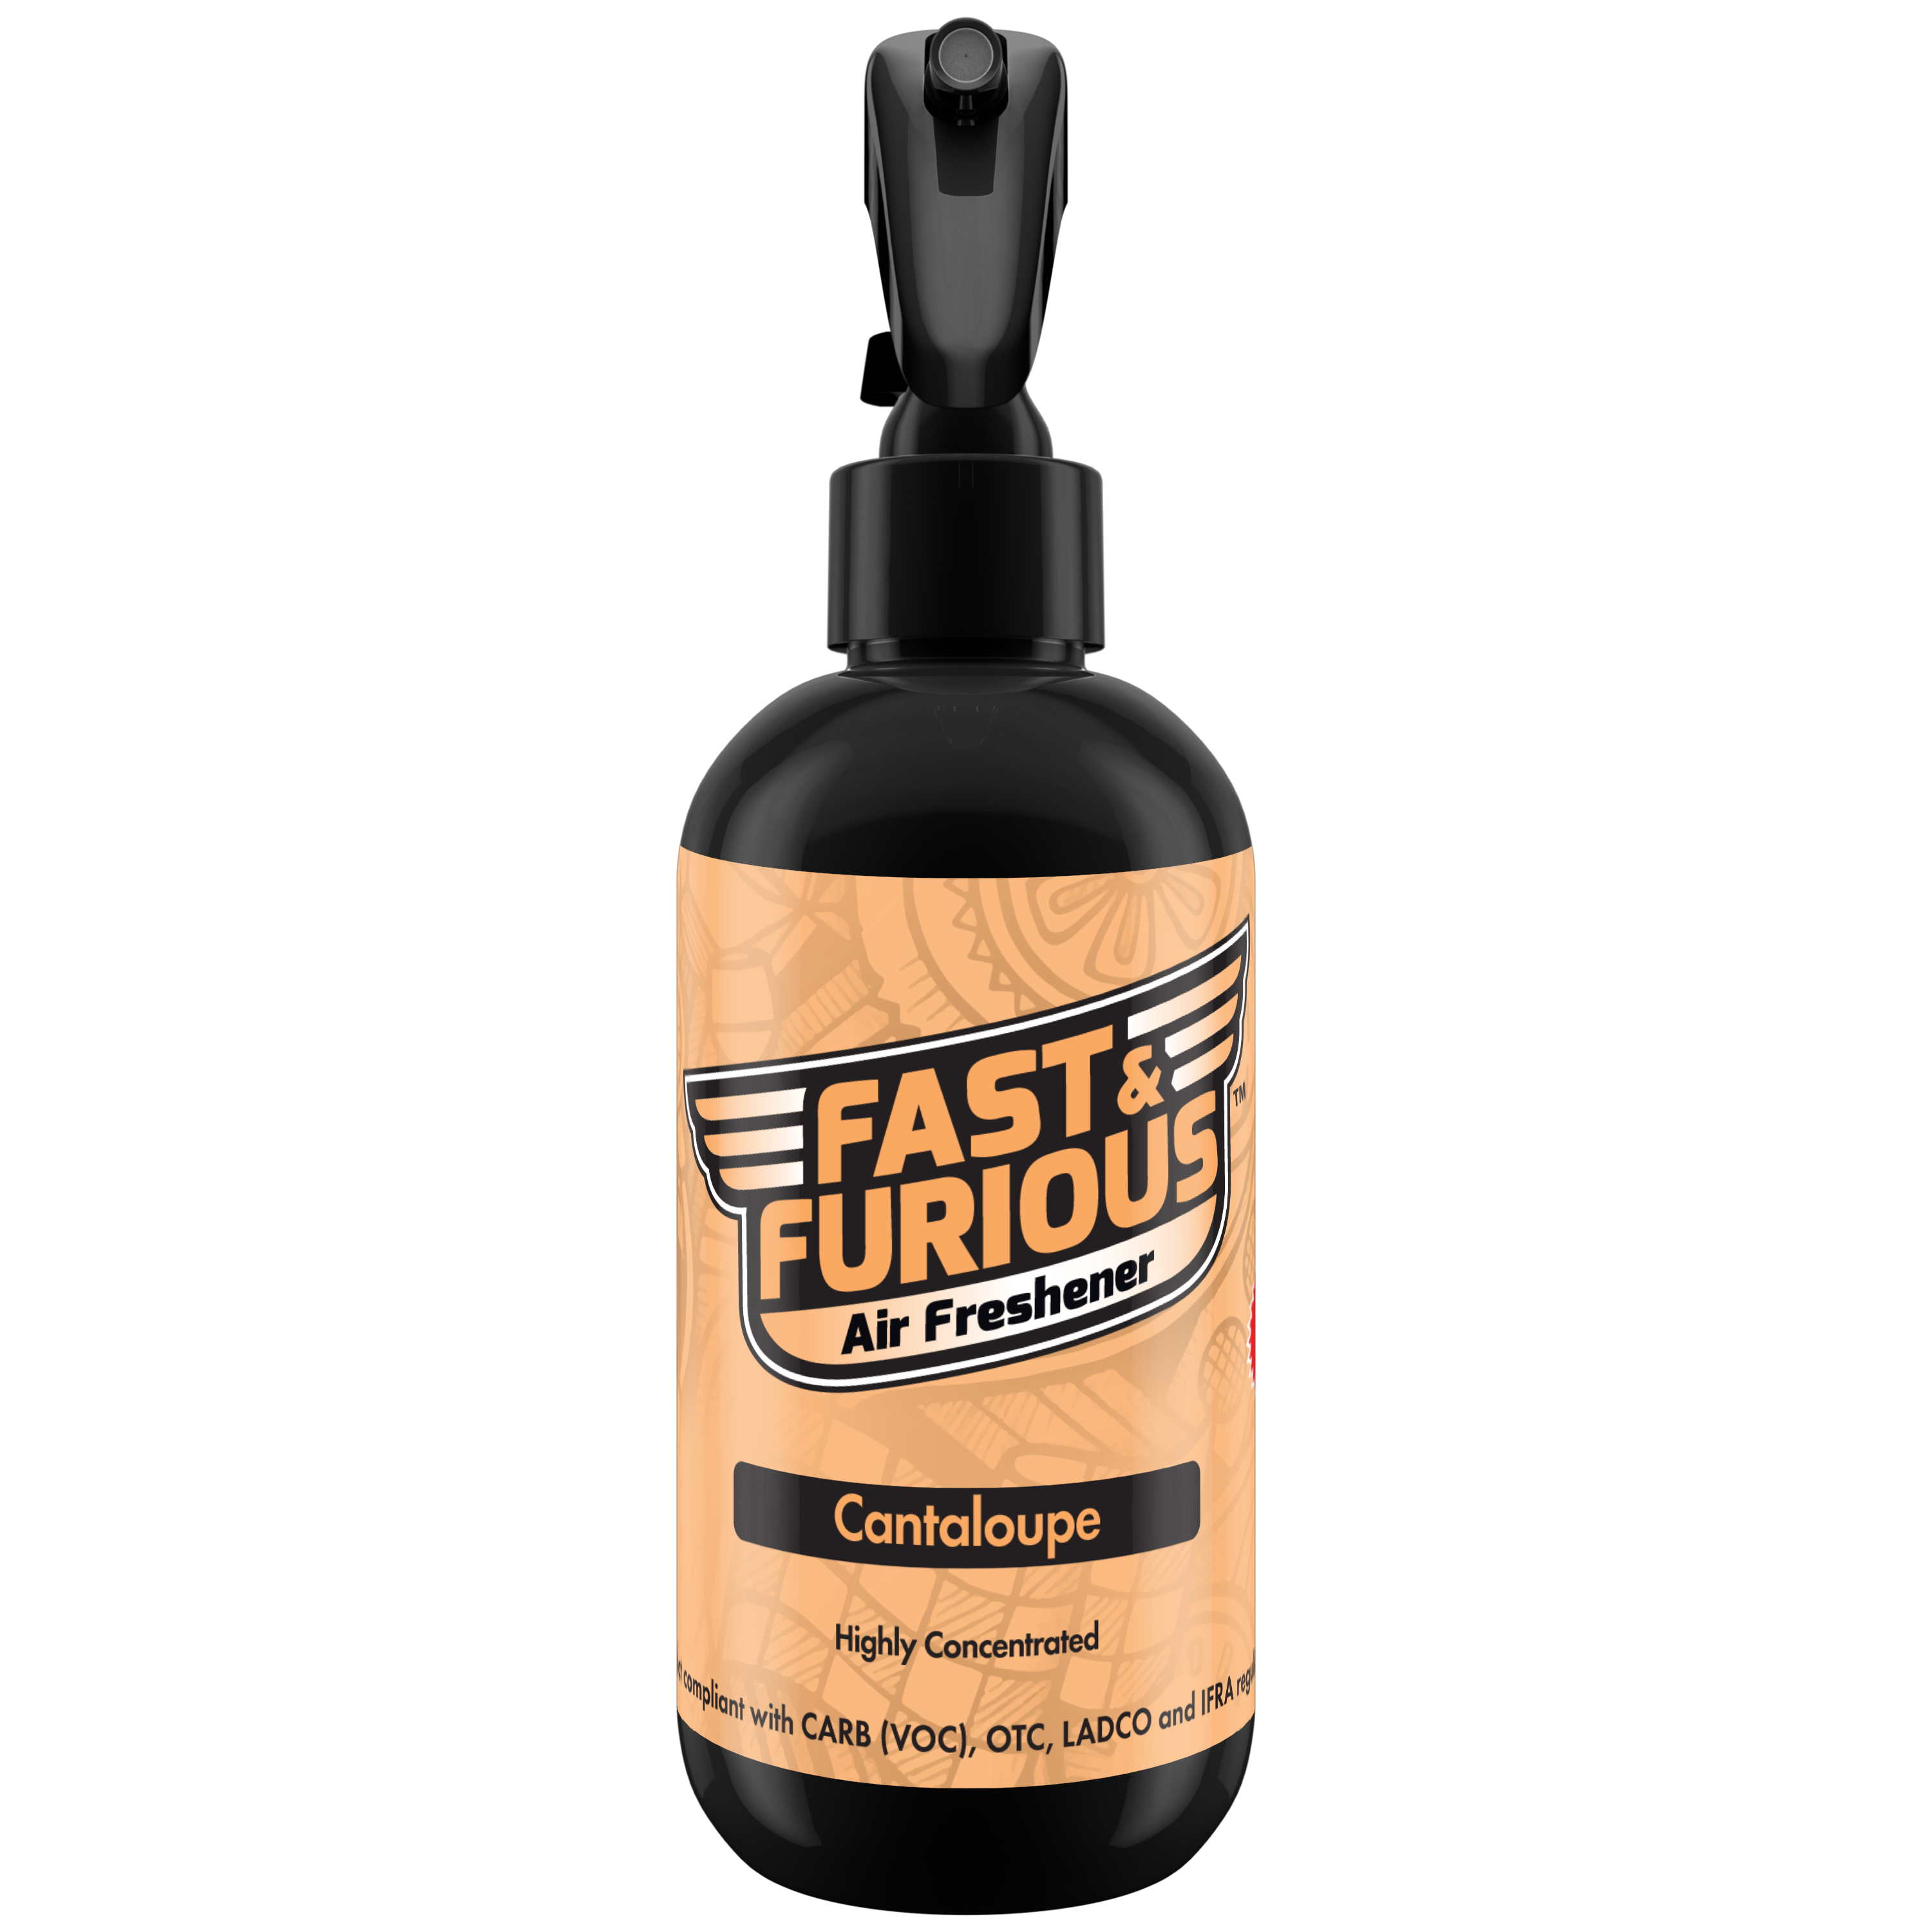 Fast and Furious Air Freshener - Cantaloupe Scent